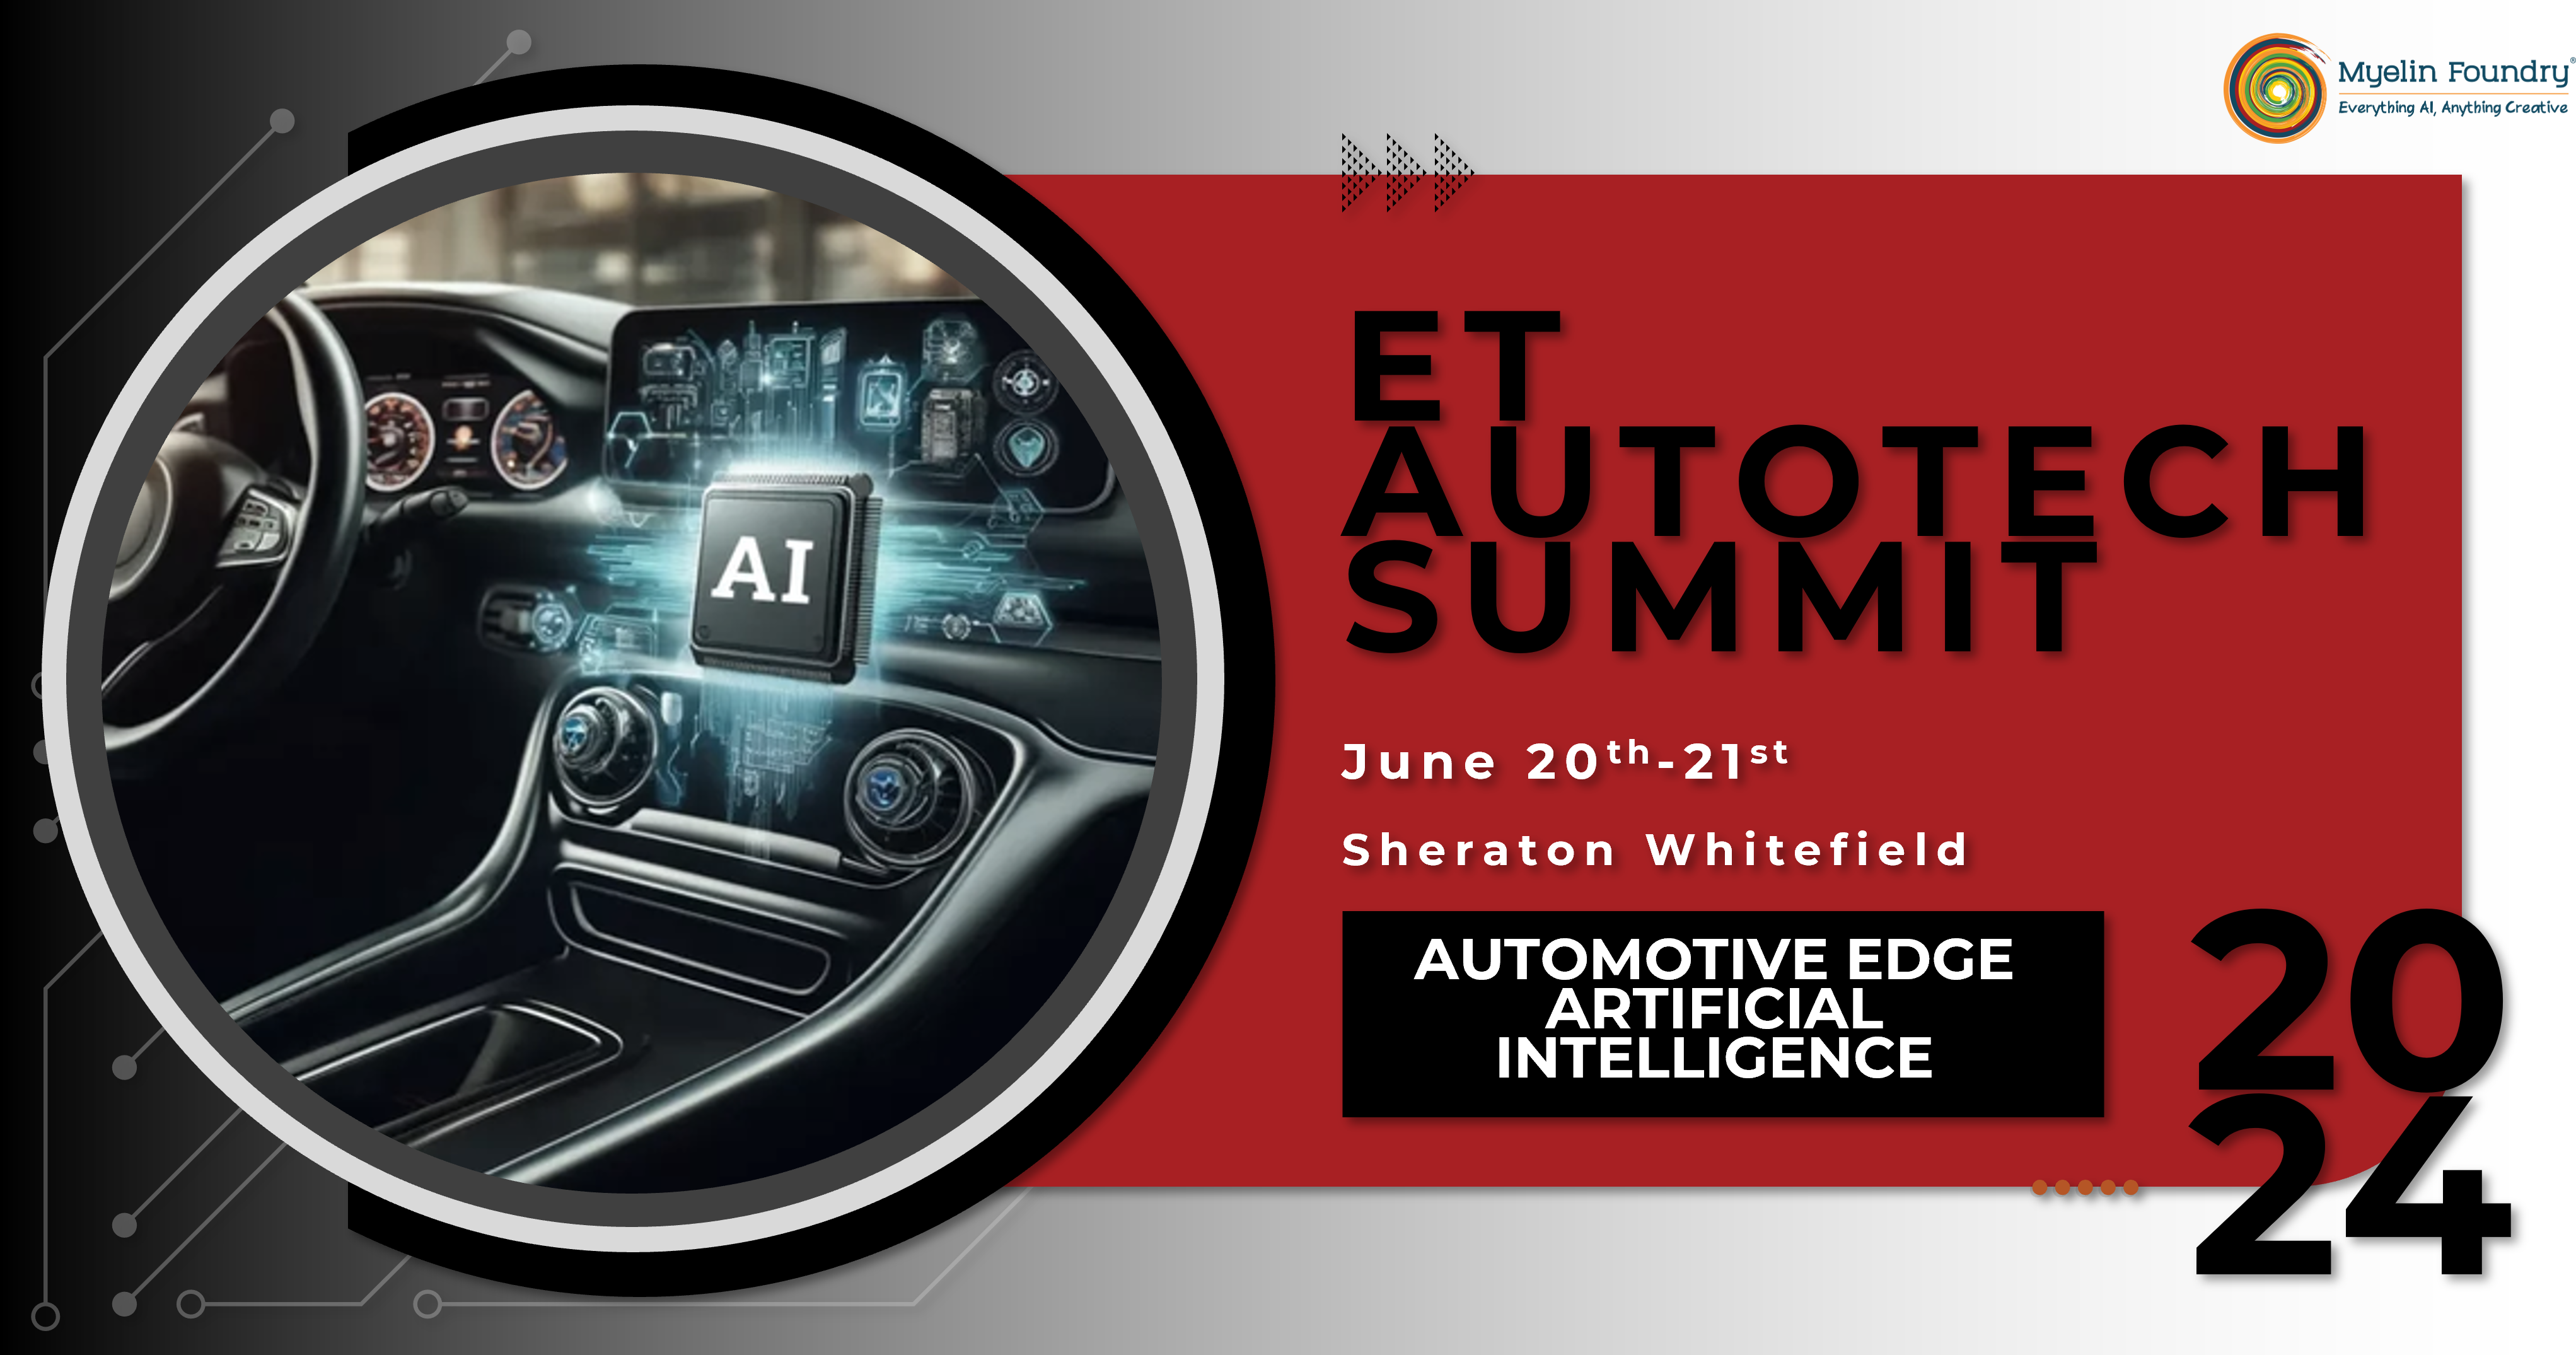 Meet us at the ET Autotech Summit in Bangalore